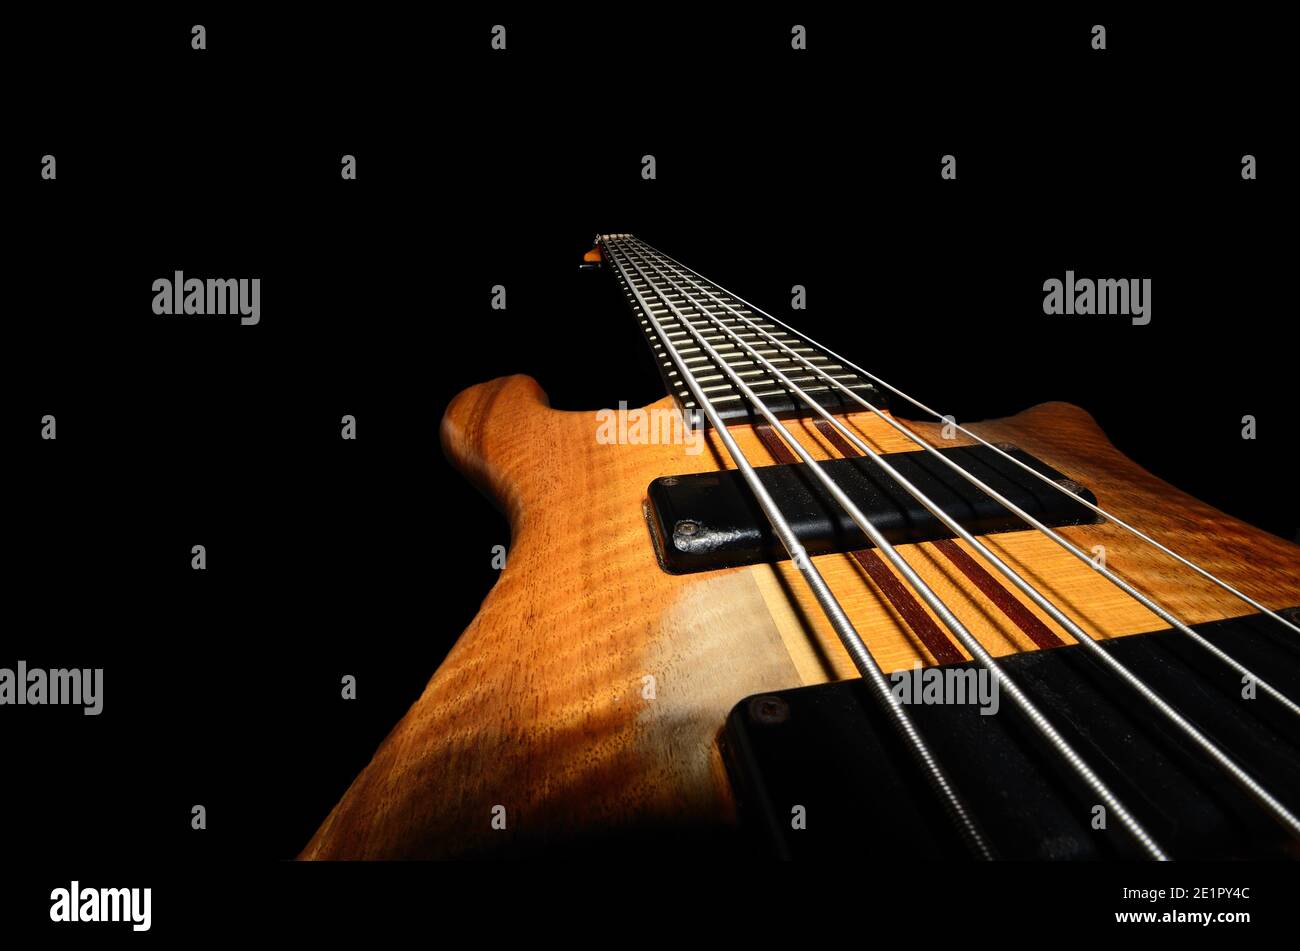 bass guitar strings with wooden close up black background Stock Photo